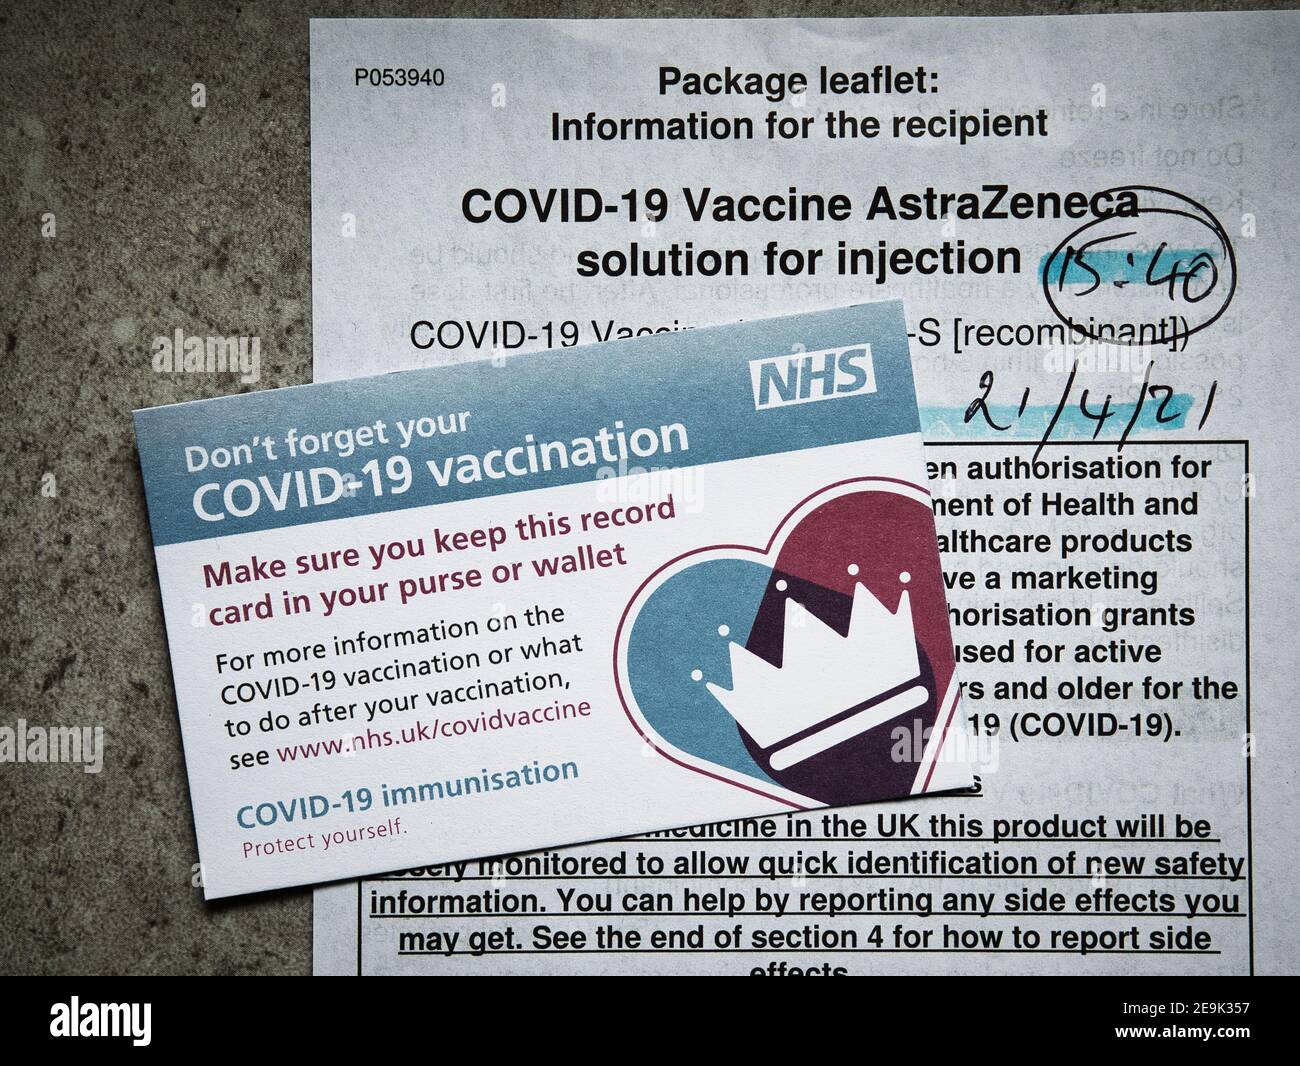 A UK NHS COVID-19 vaccination record card, used to log details of vaccinations given. In the background is the AZ package leaflet. Stock Photo